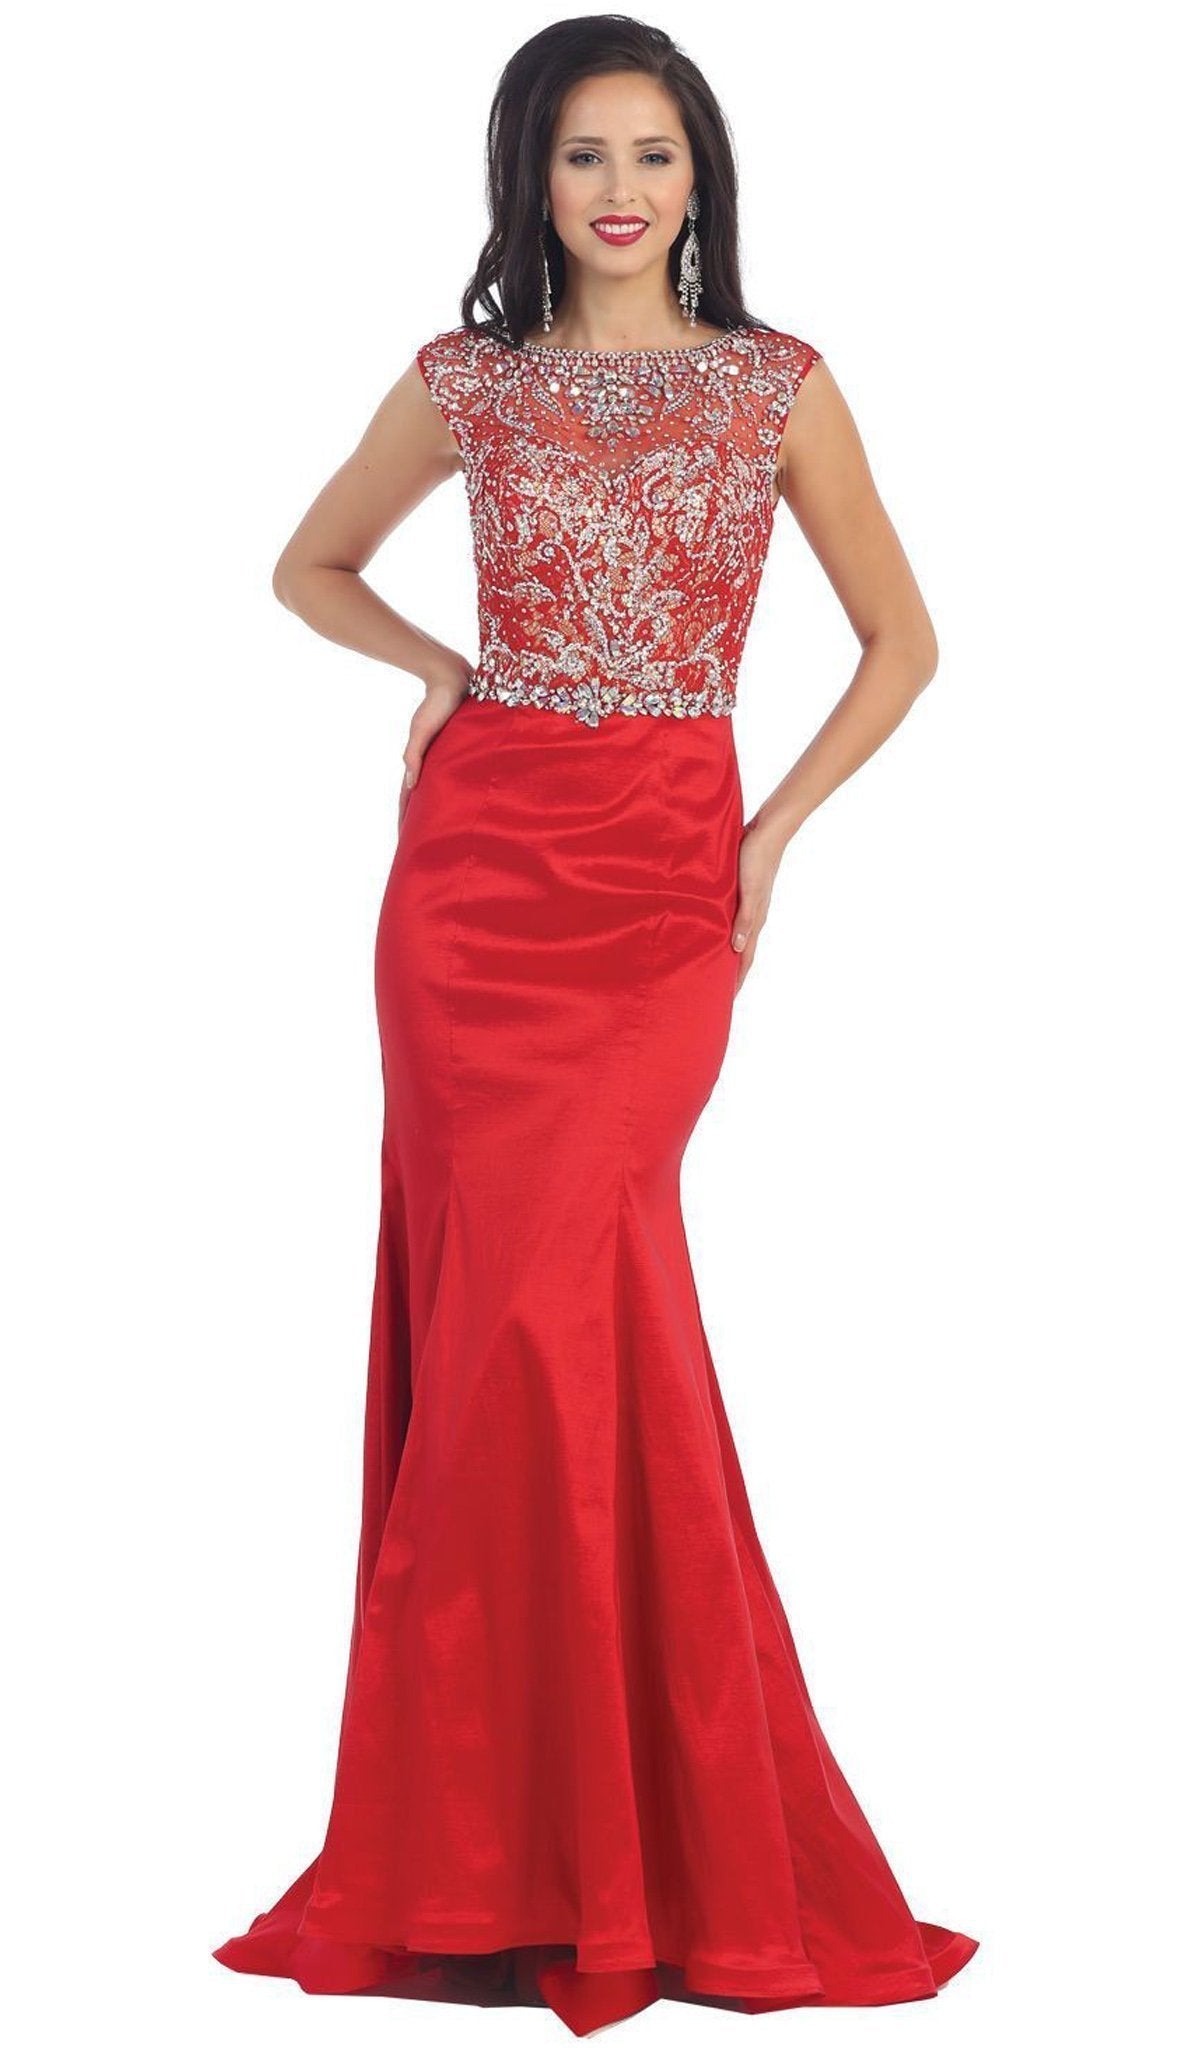 May Queen - Crystal Embellished Illusion Trumpet Evening Gown Special Occasion Dress 4 / Red